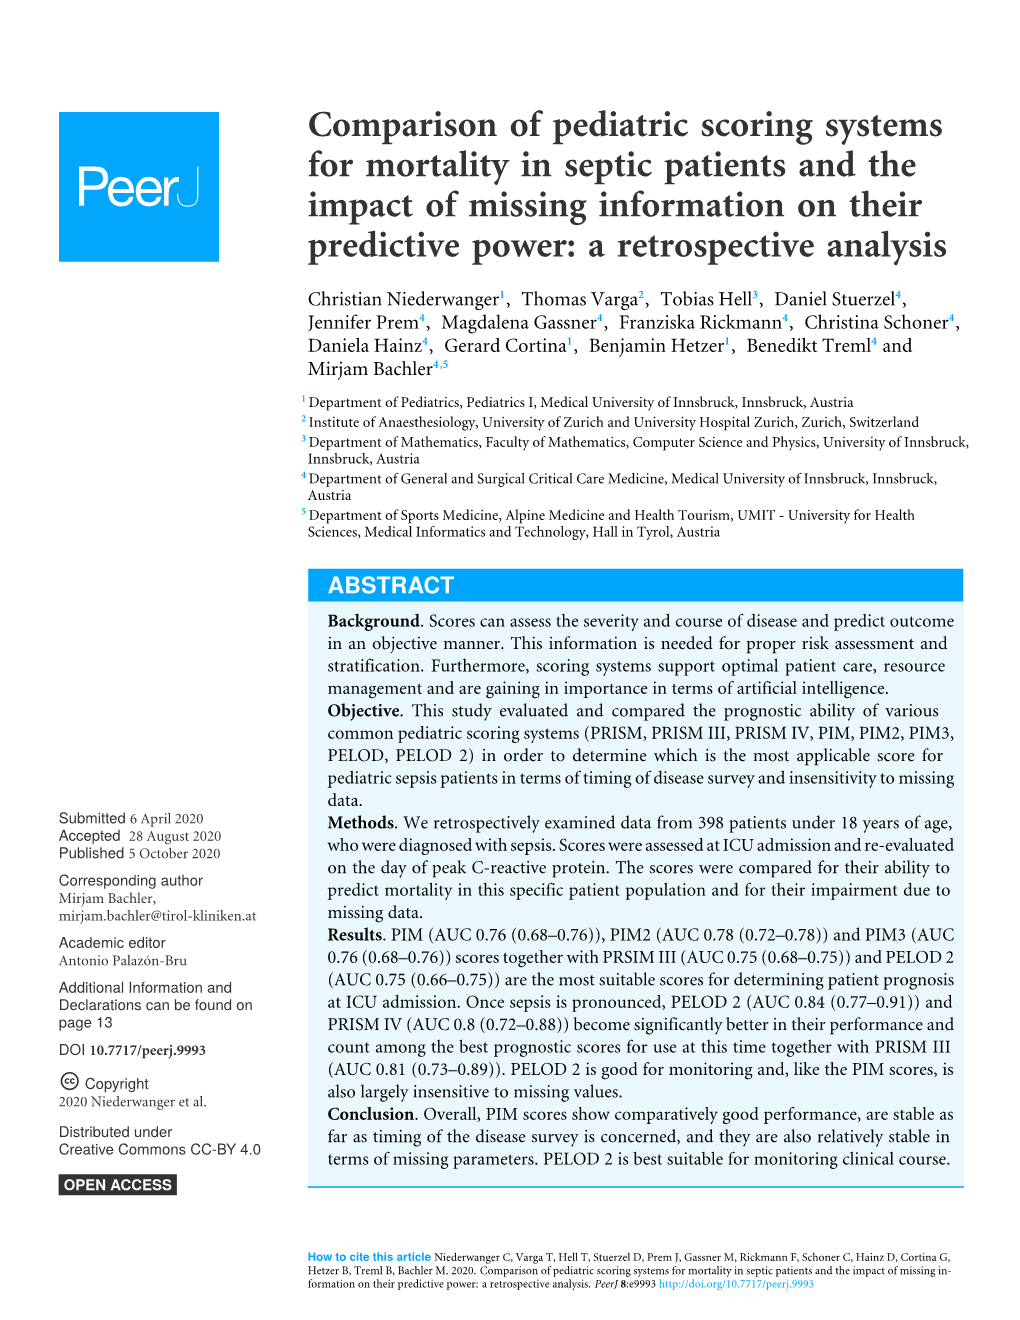 Comparison of Pediatric Scoring Systems for Mortality in Septic Patients and the Impact of Missing Information on Their Predictive Power: a Retrospective Analysis